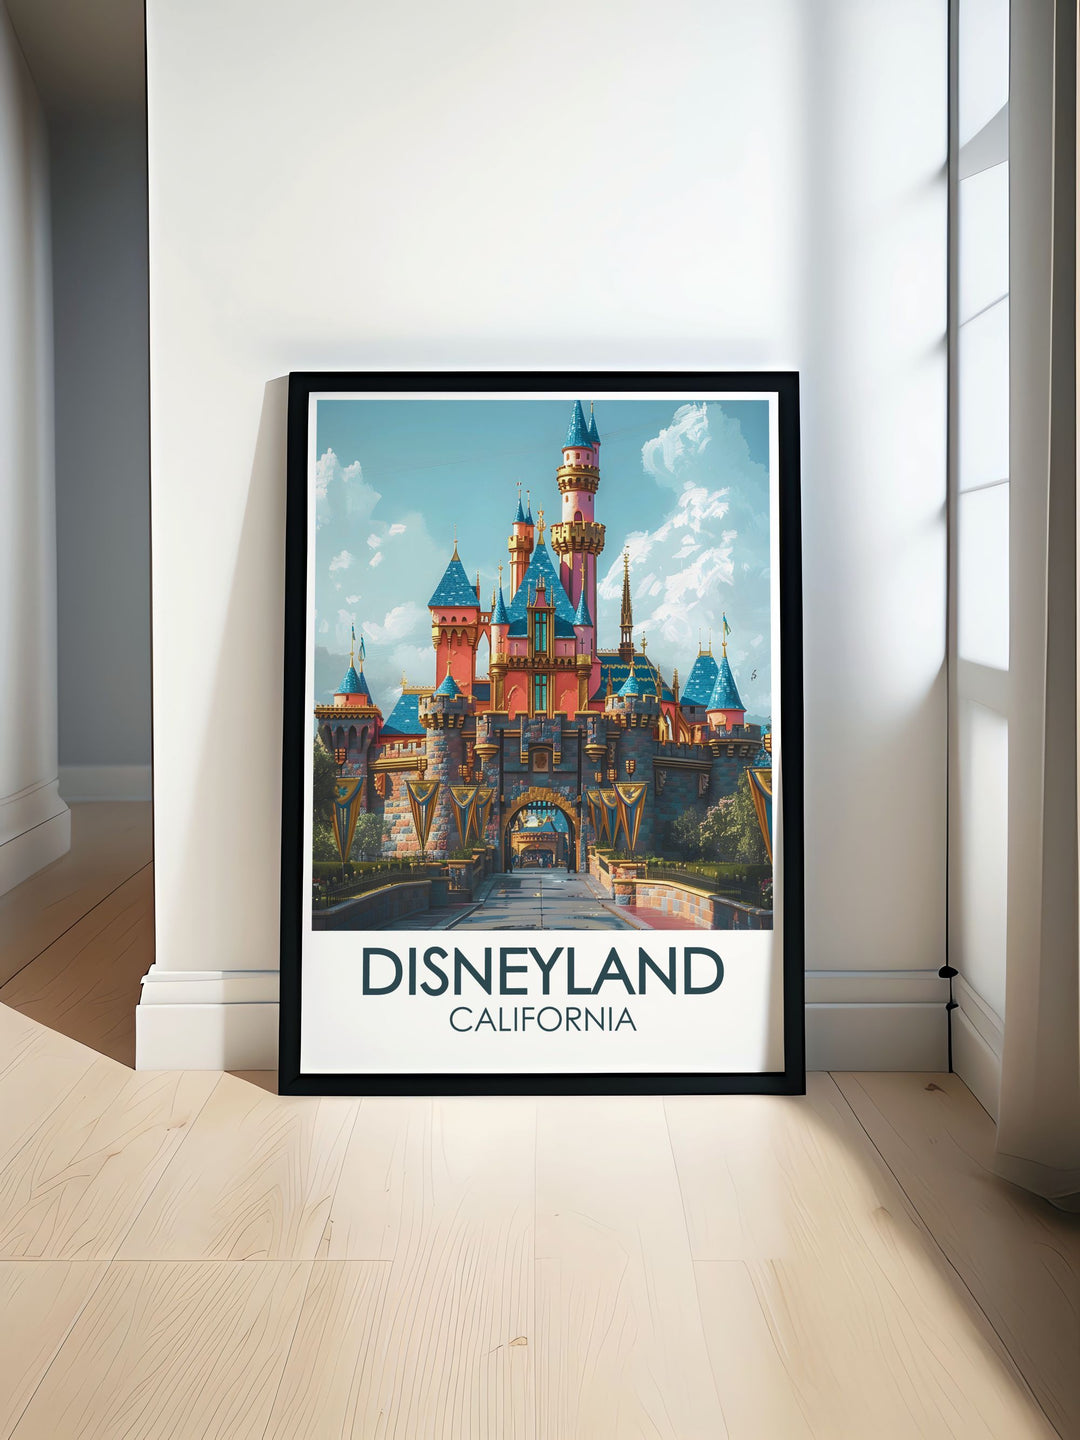 This travel poster beautifully depicts the magic of Disneyland Resort Anaheim, with its enchanting attractions and whimsical charm, making it an ideal piece for Disney fans and collectors. Bring the joy and wonder of Disneyland into your home with this exquisite print.